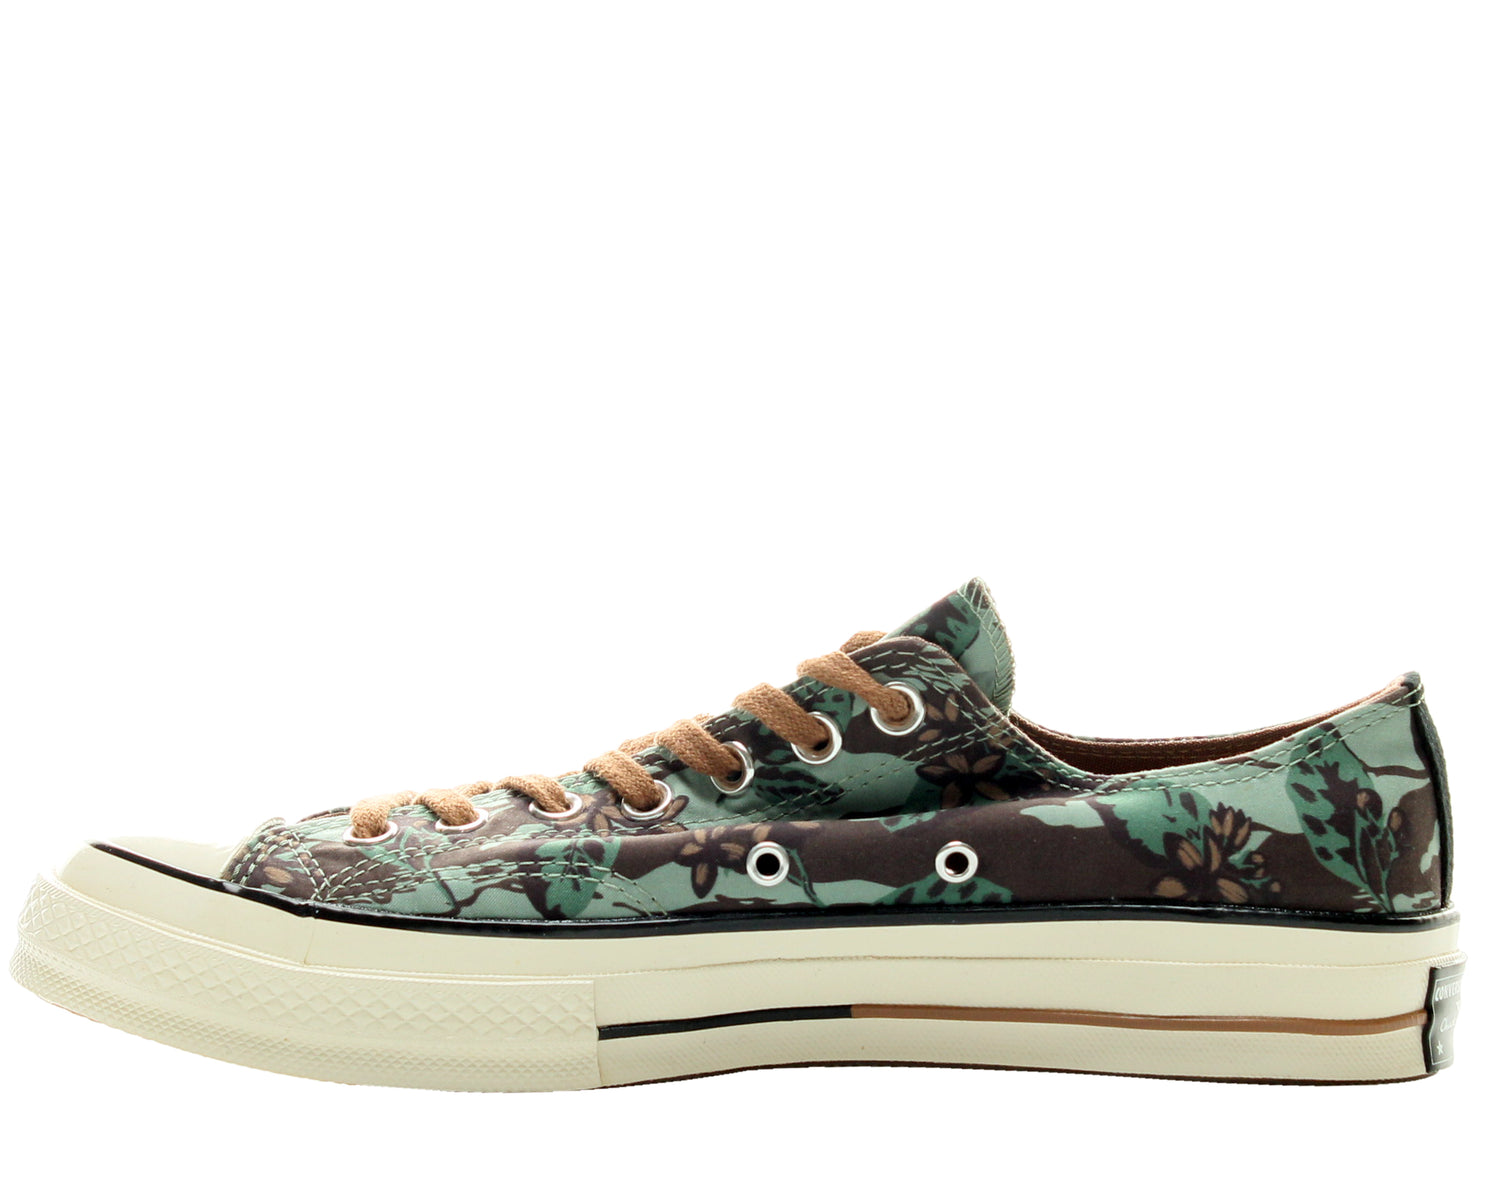 Converse Chuck Taylor All Star OX 1970 Floral Low Top Sneakers